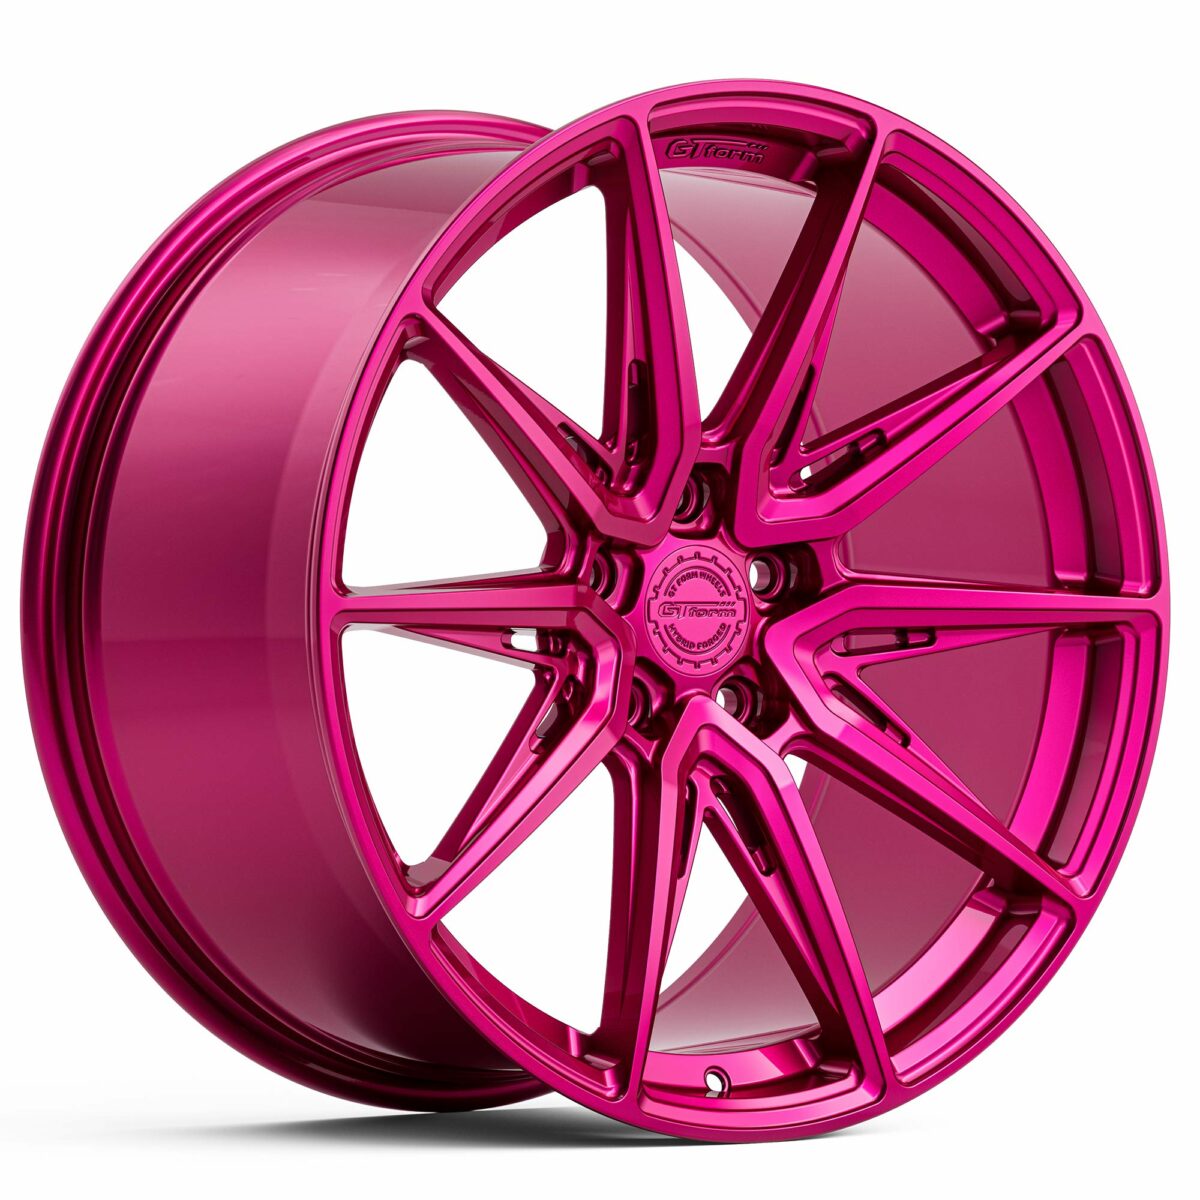 PERFORMANCE WHEELS GT FORM HF4.1 HYBRID FORGED ILLUSION PINK 20X9 20X10.5 20X12 STAGGERED RIMS